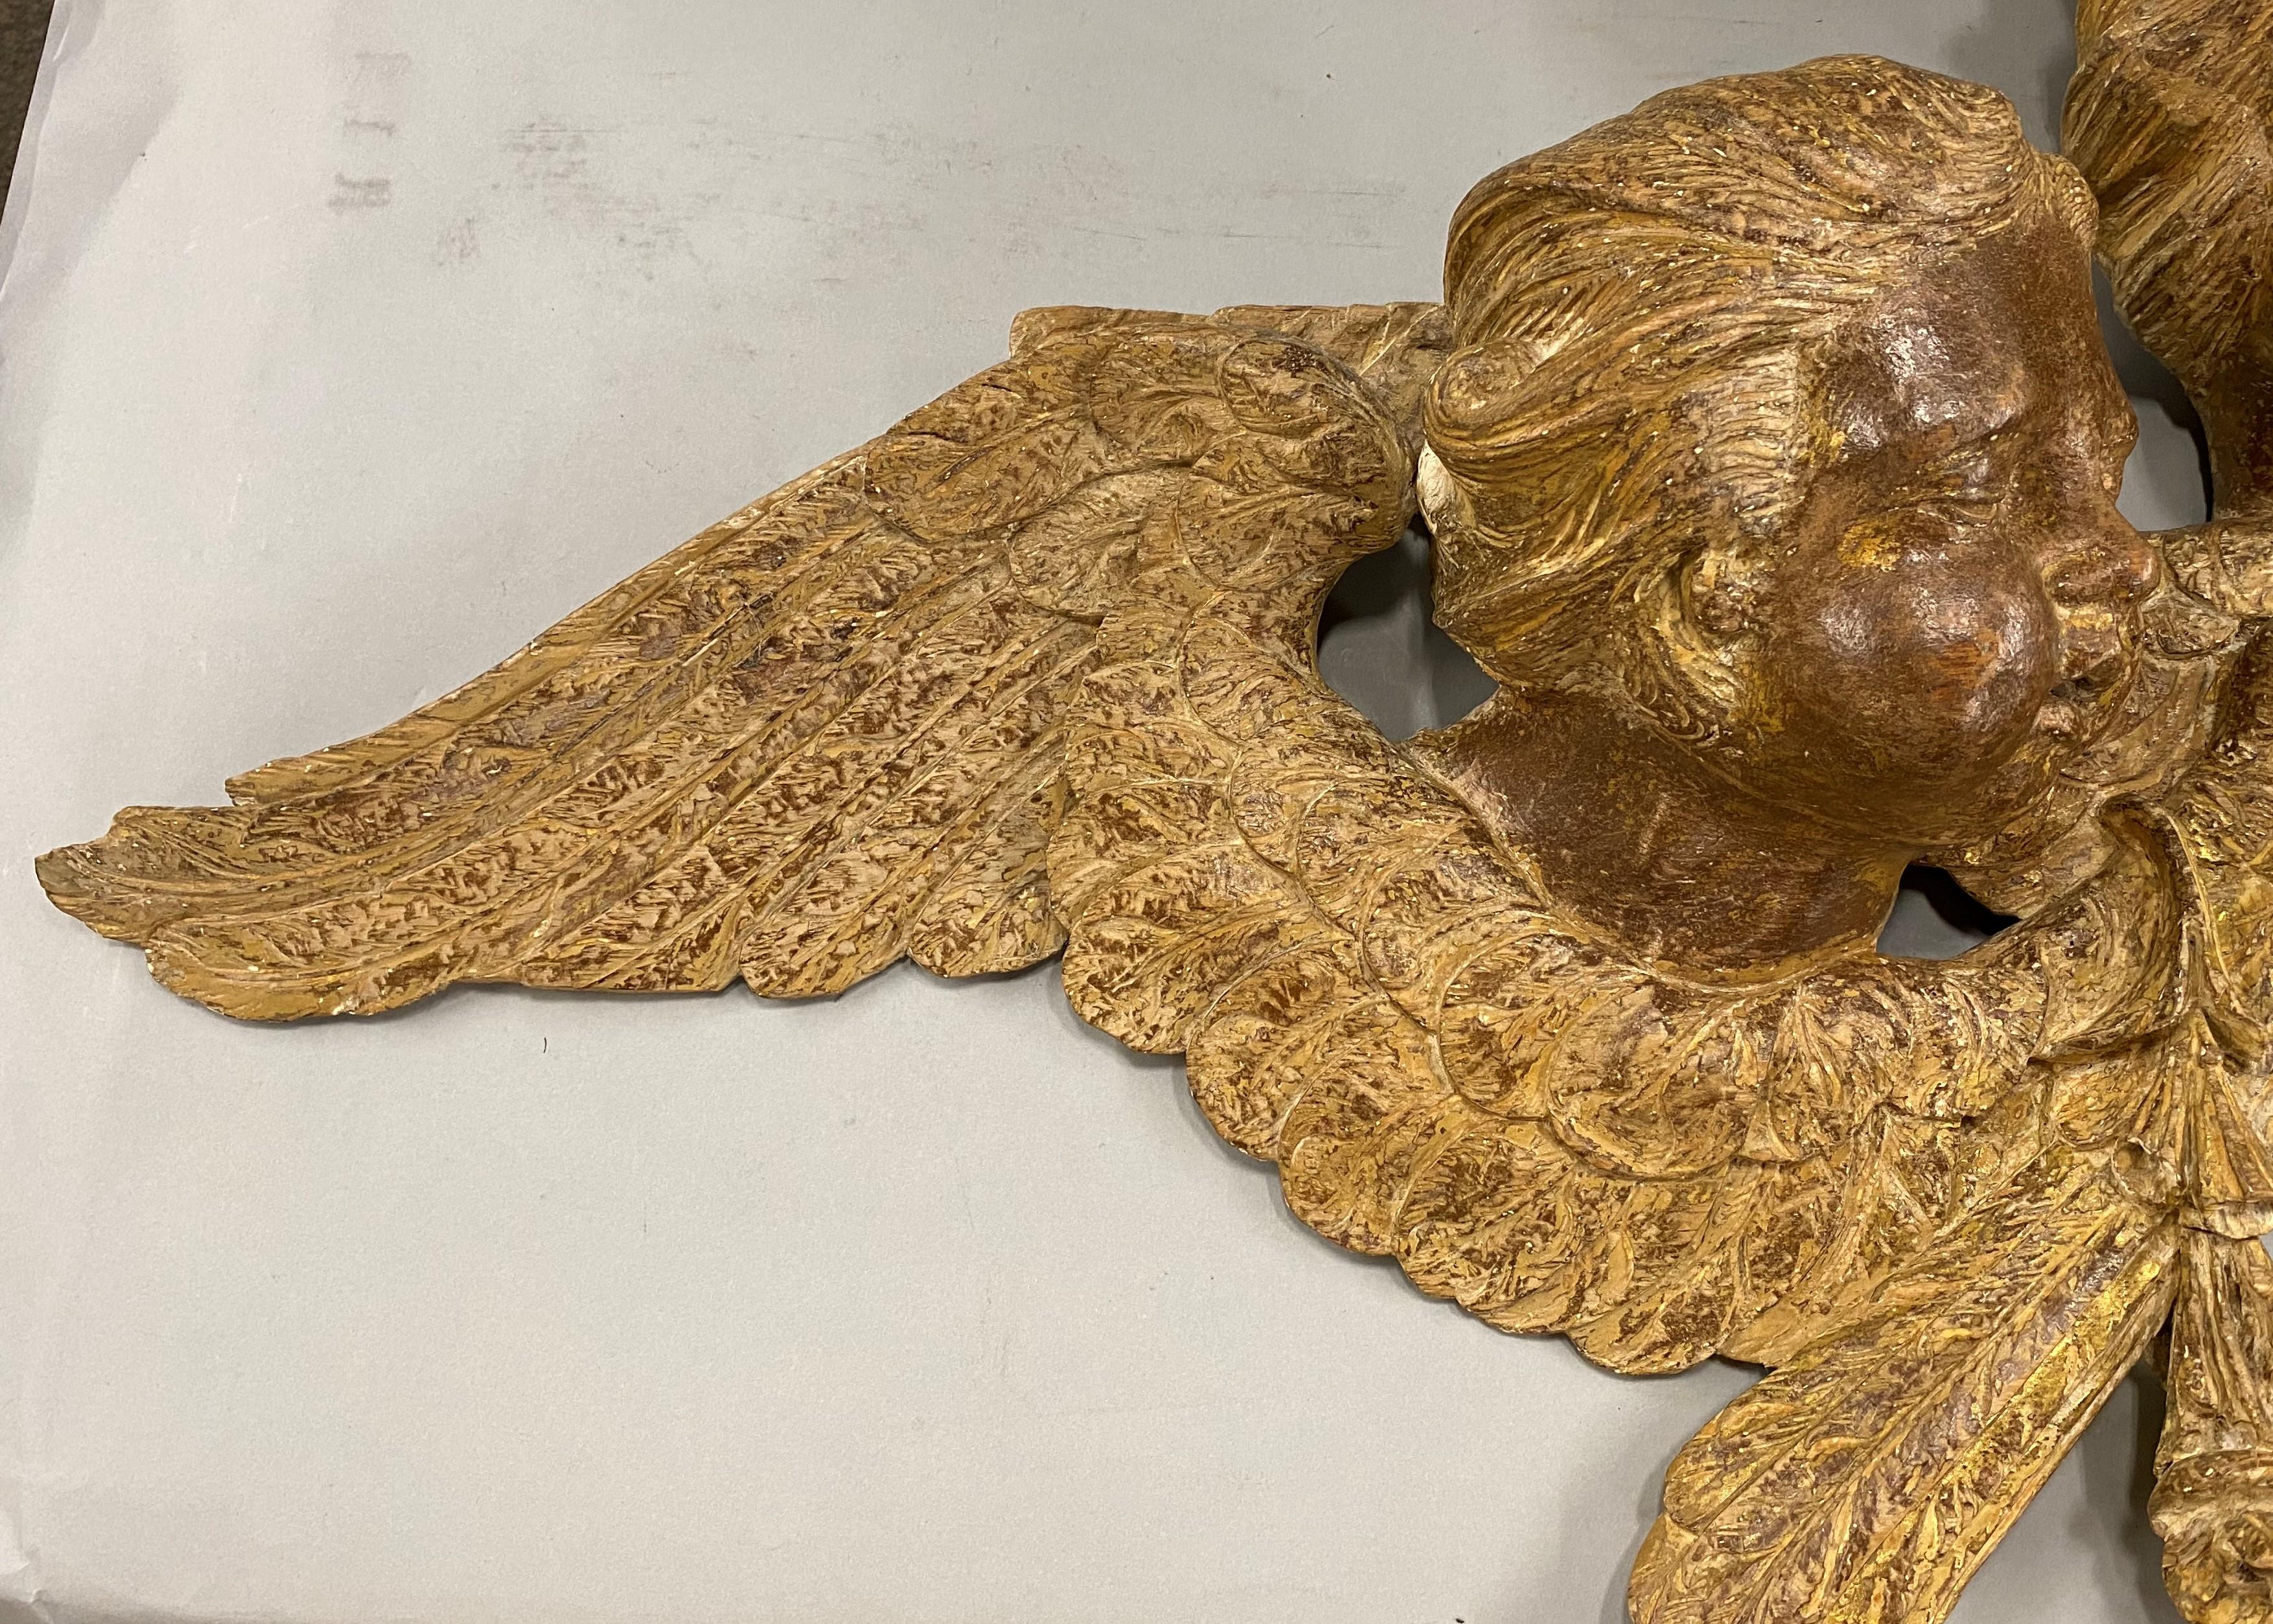 A nicely carved group of three giltwood cherub heads with outstretched wings and foliate accents, probably 19th century Continental (French or Italian) in origin, in very good overall condition, with some gilt losses and high point rubs, as well as